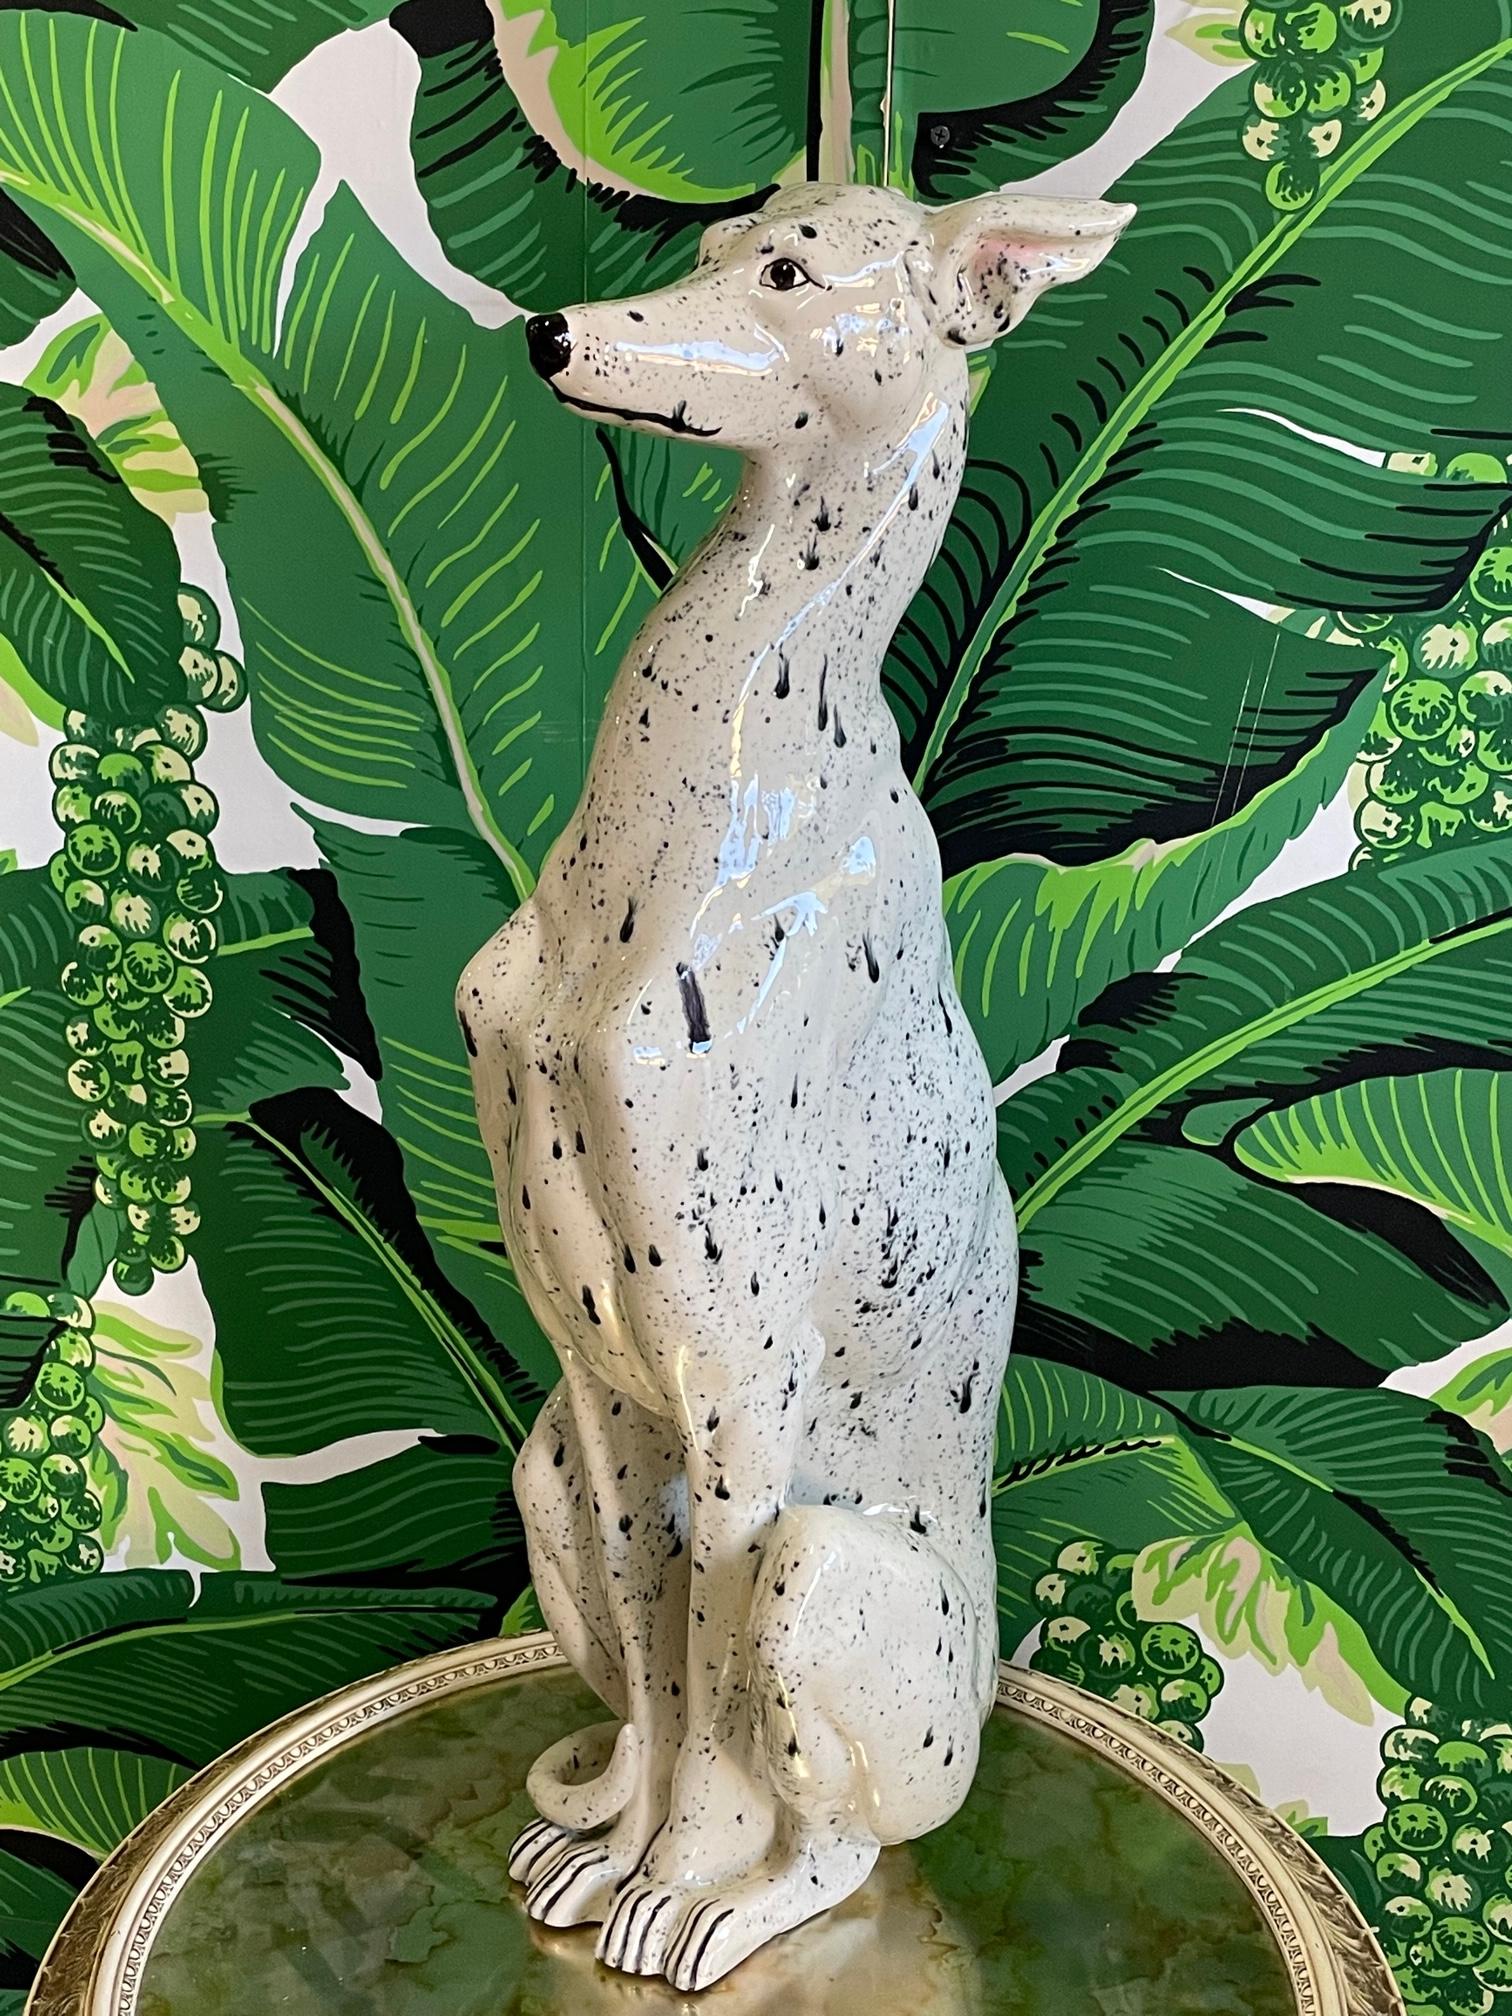 Life size ceramic dog statue features hand painted finish and heavy gloss. Either a whippet or an Italian greyhound. Stands 28